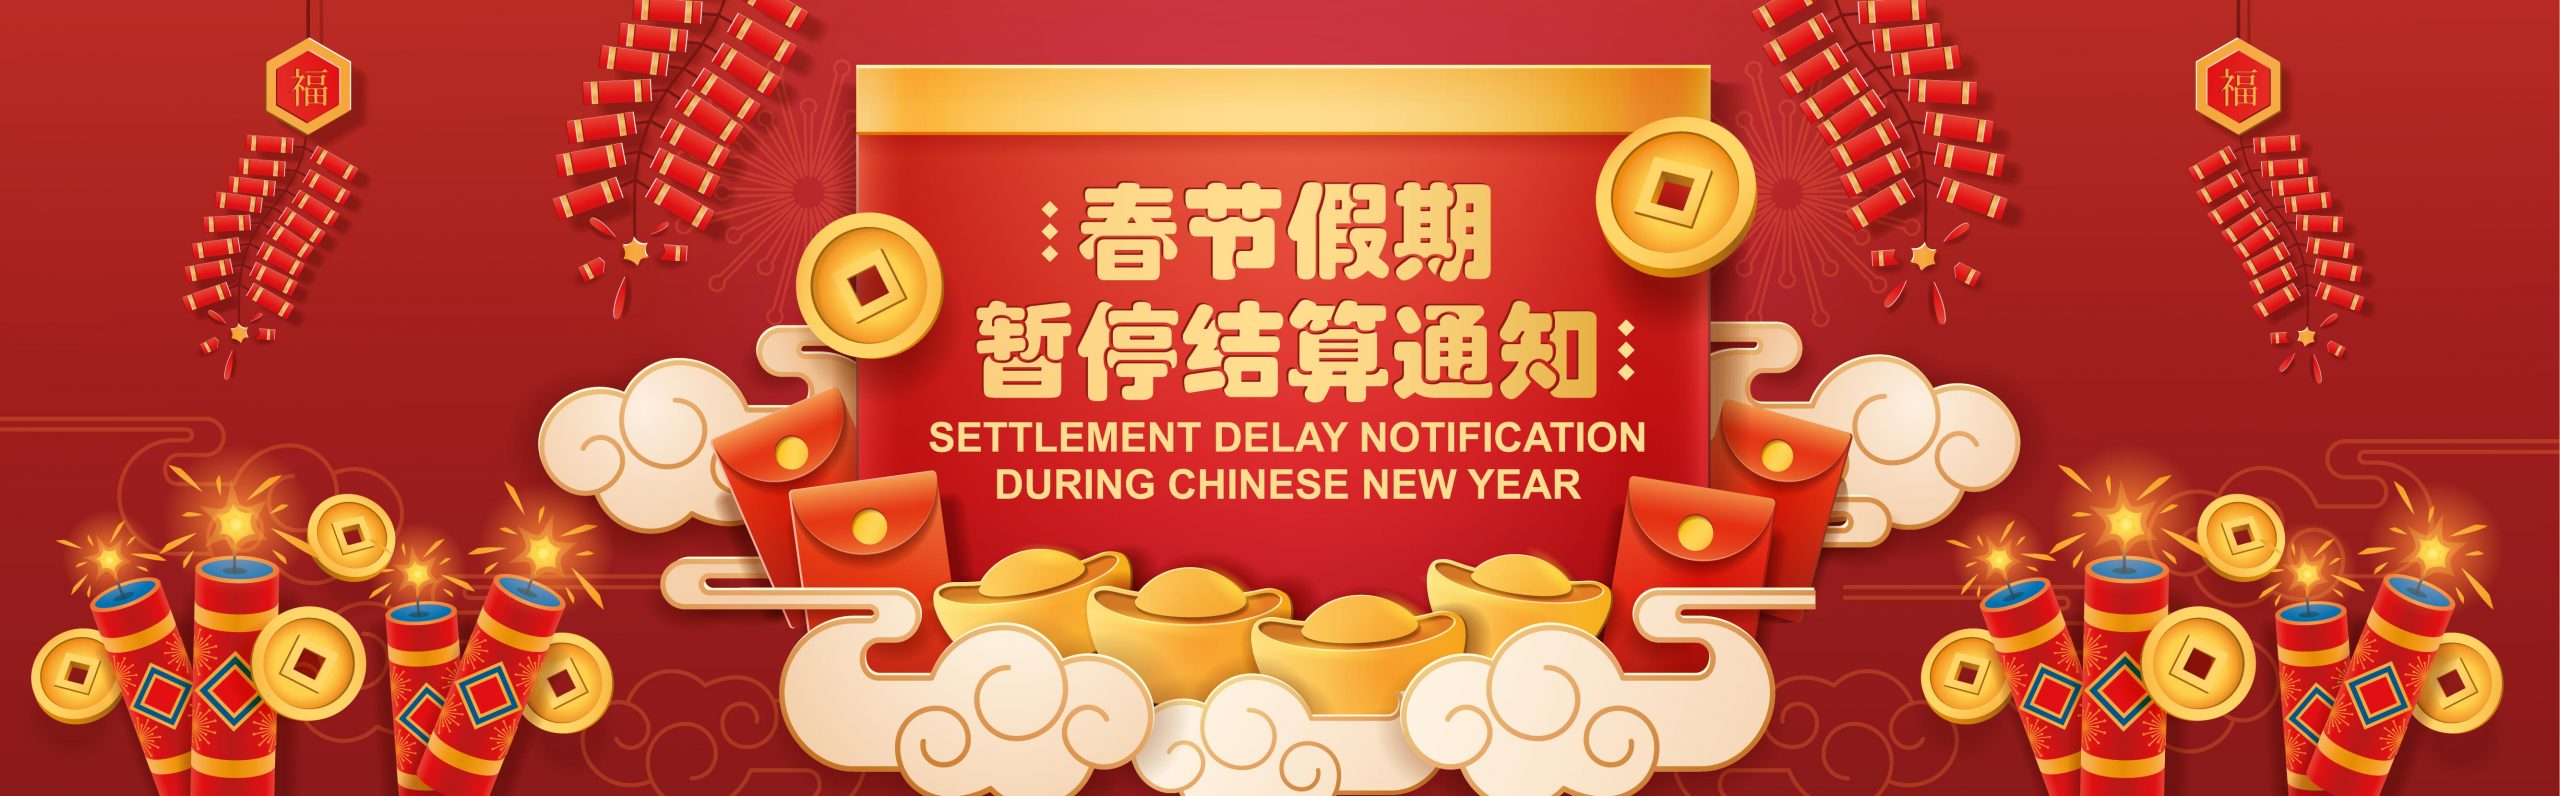 Settlement Delay Notification During Chinese New Year 关于春节假期暂停结算的通知